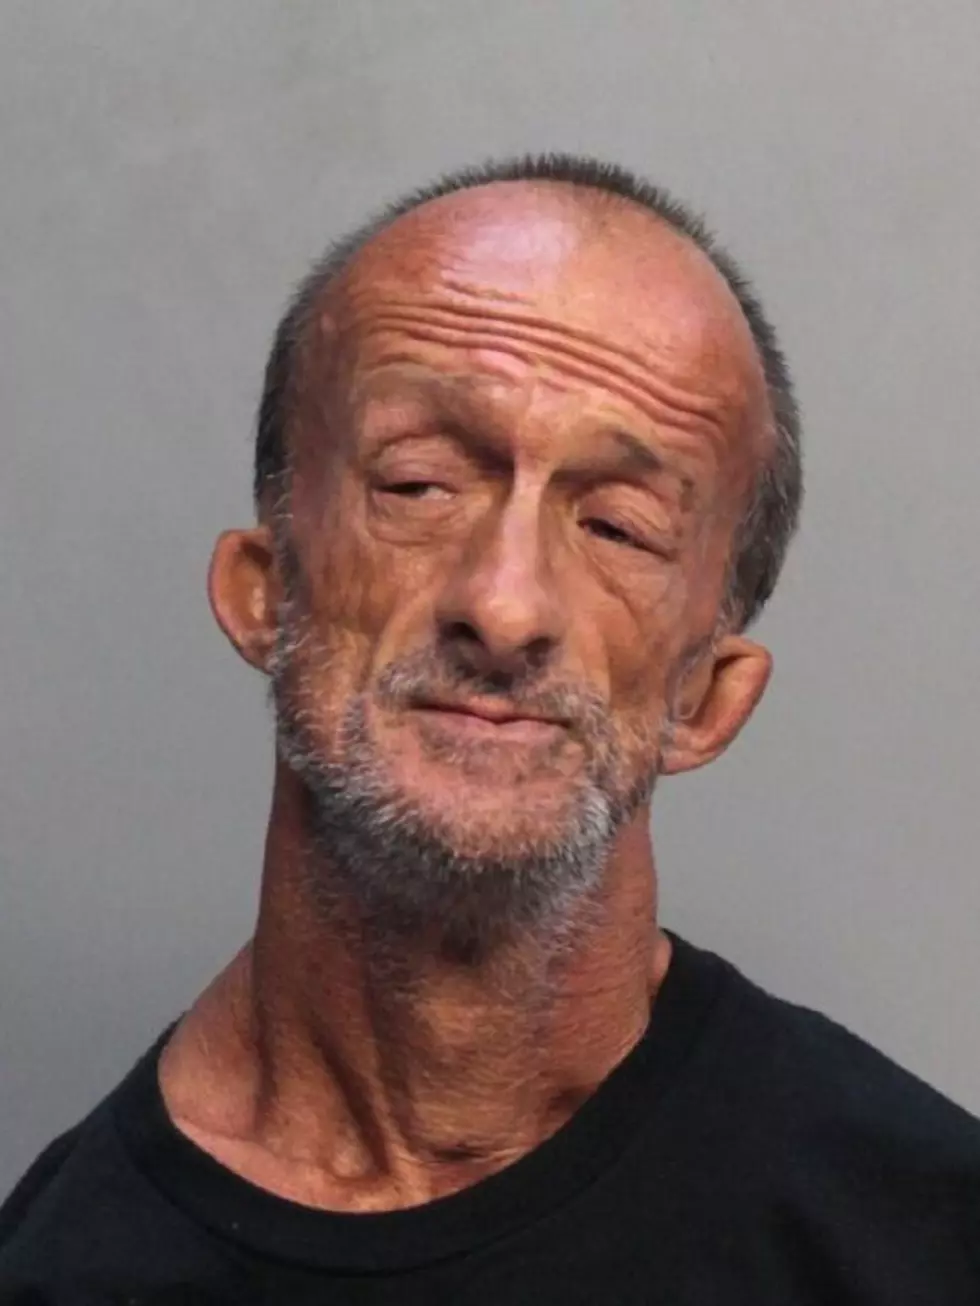 A Miami Man With No Arms Charged With Stabbing A Chicago Tourist